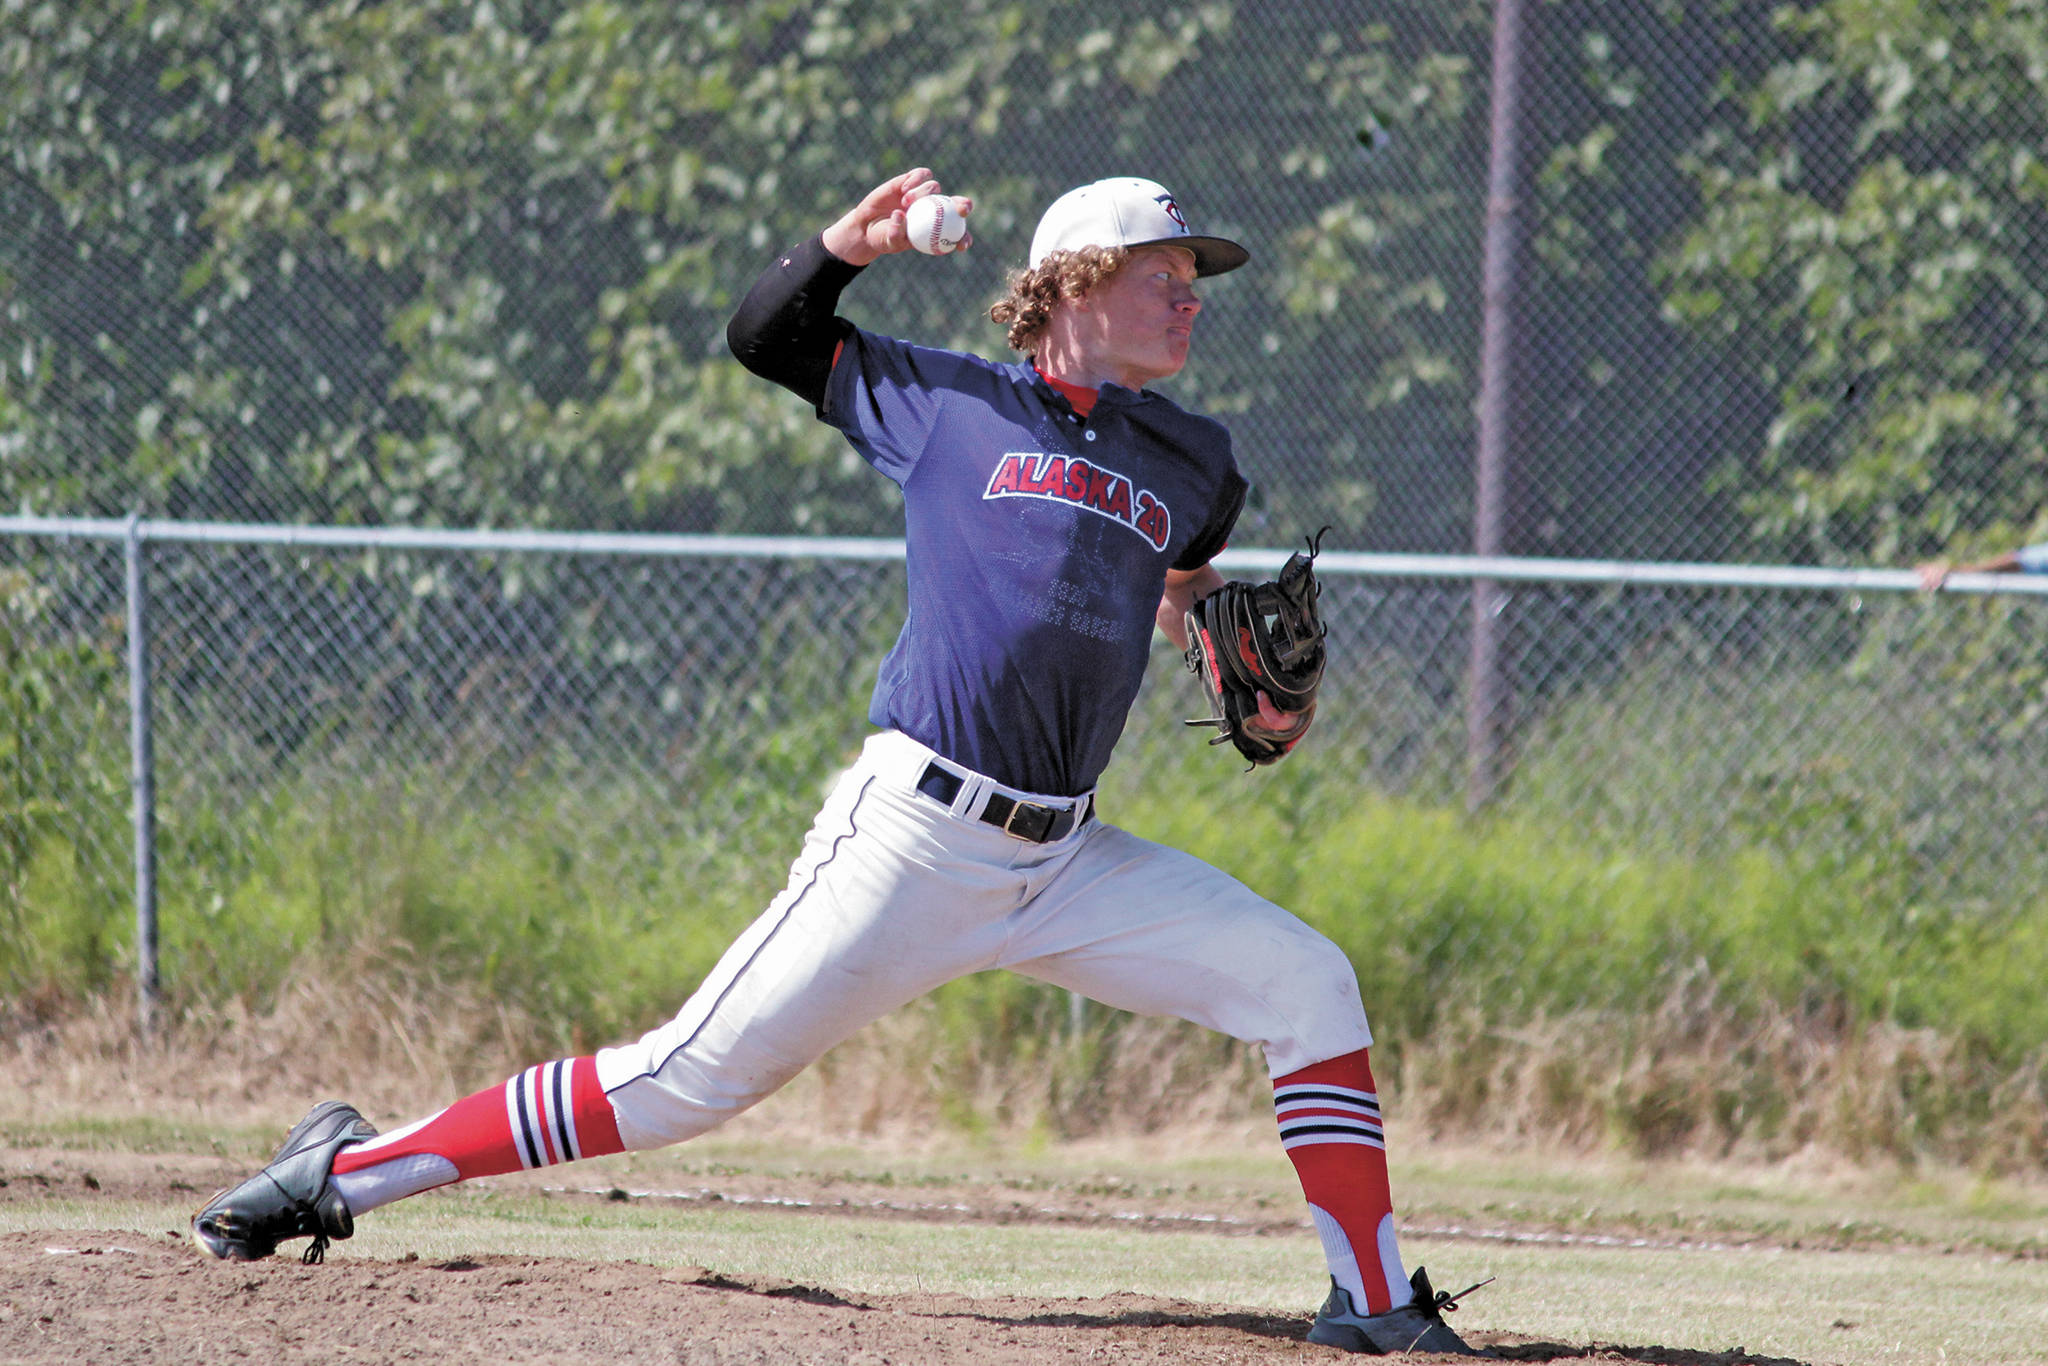 Alaska 20 player Mose Hayes pitches during an Alliance Baseball League game against Dimond on Saturday, July 4, 2020 at Karen Hornaday Park in Homer, Alaska. (Photo by Megan Pacer/Homer News)